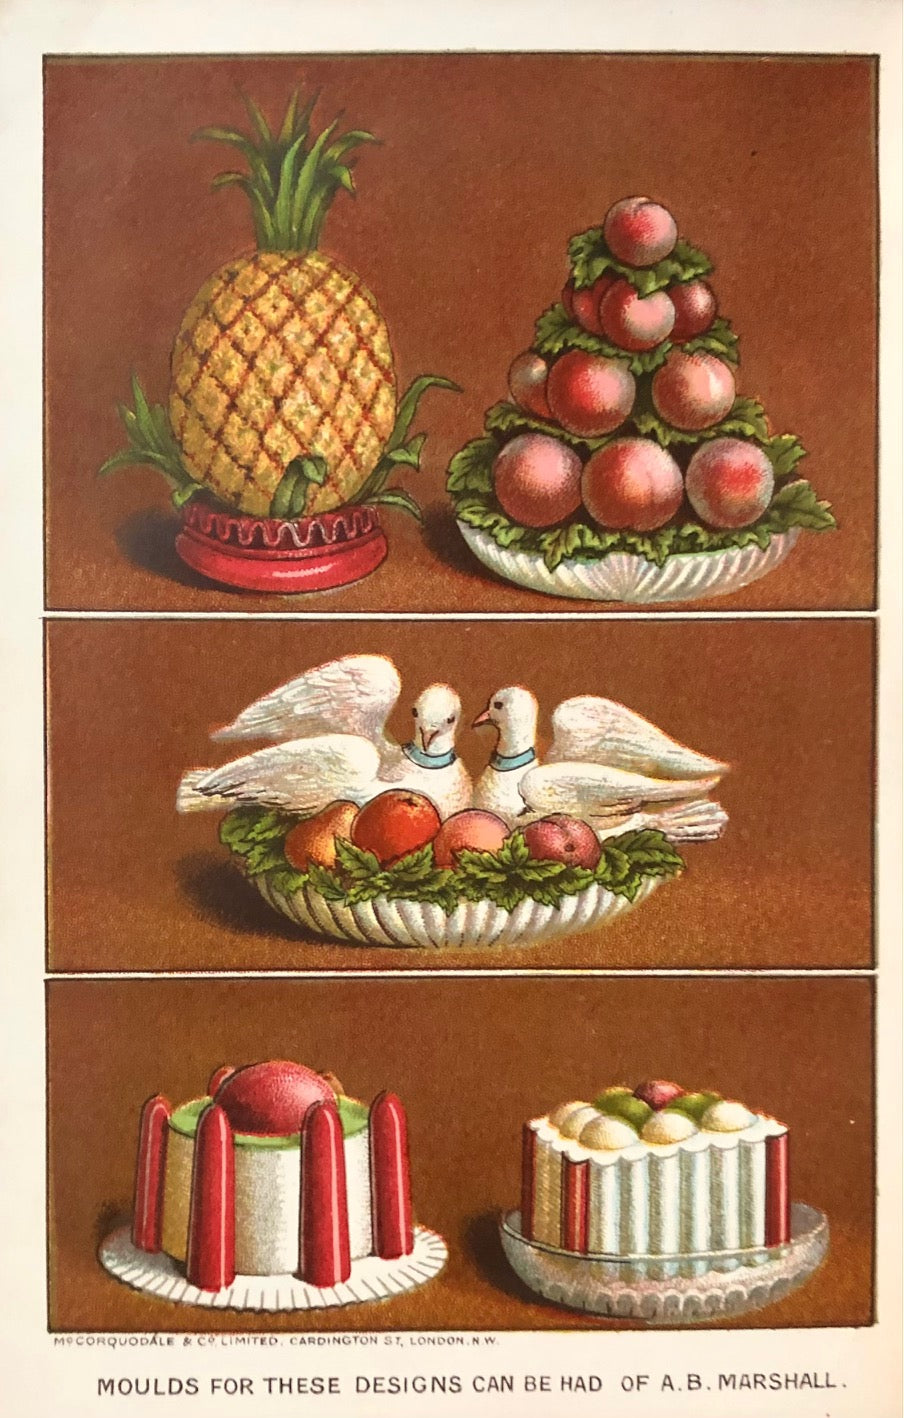 (Ice Cream) Mrs. A.B. Marshall. The Book of Ices, including Cream and Water Ices, Sorbets, Mousses, Iced Souffles, and Various Iced Dishes.